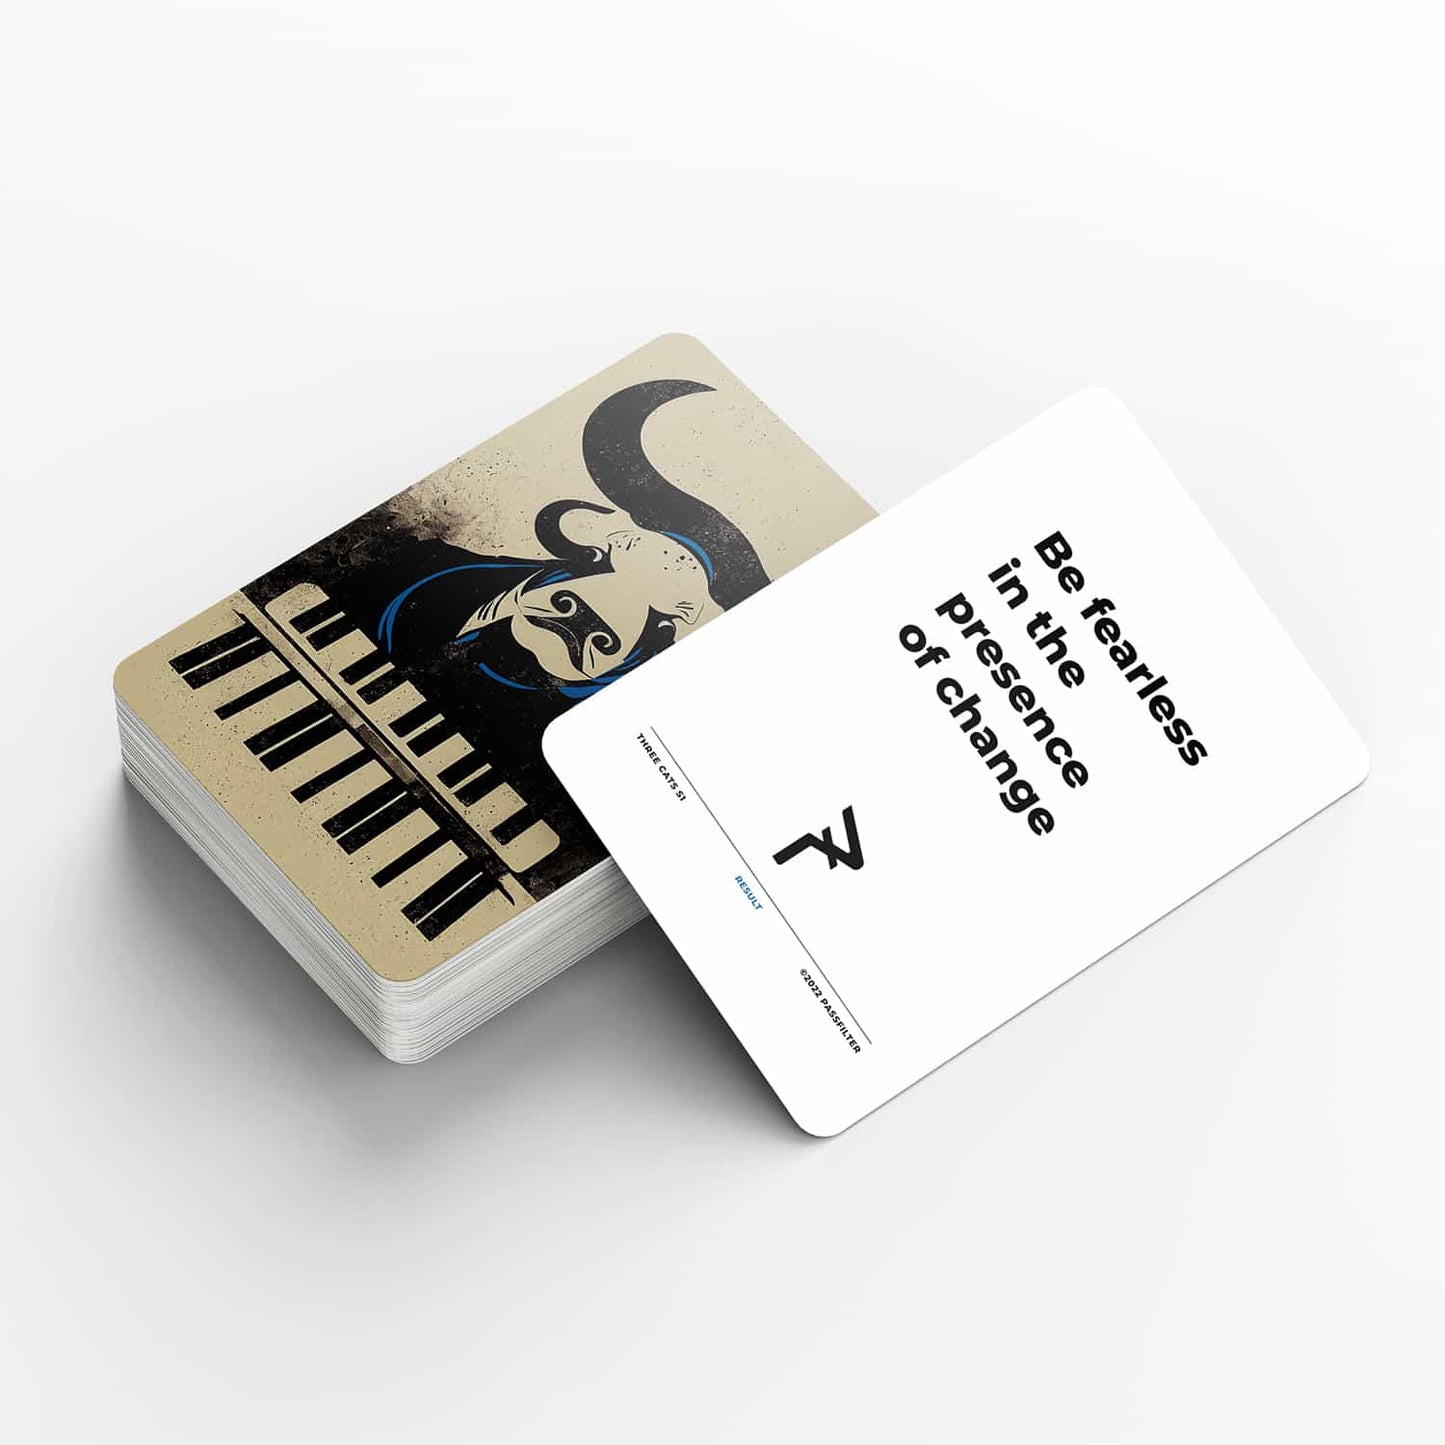 Three Cats Series One: More Signal Less Bull$#!+ Card Deck for Musicians